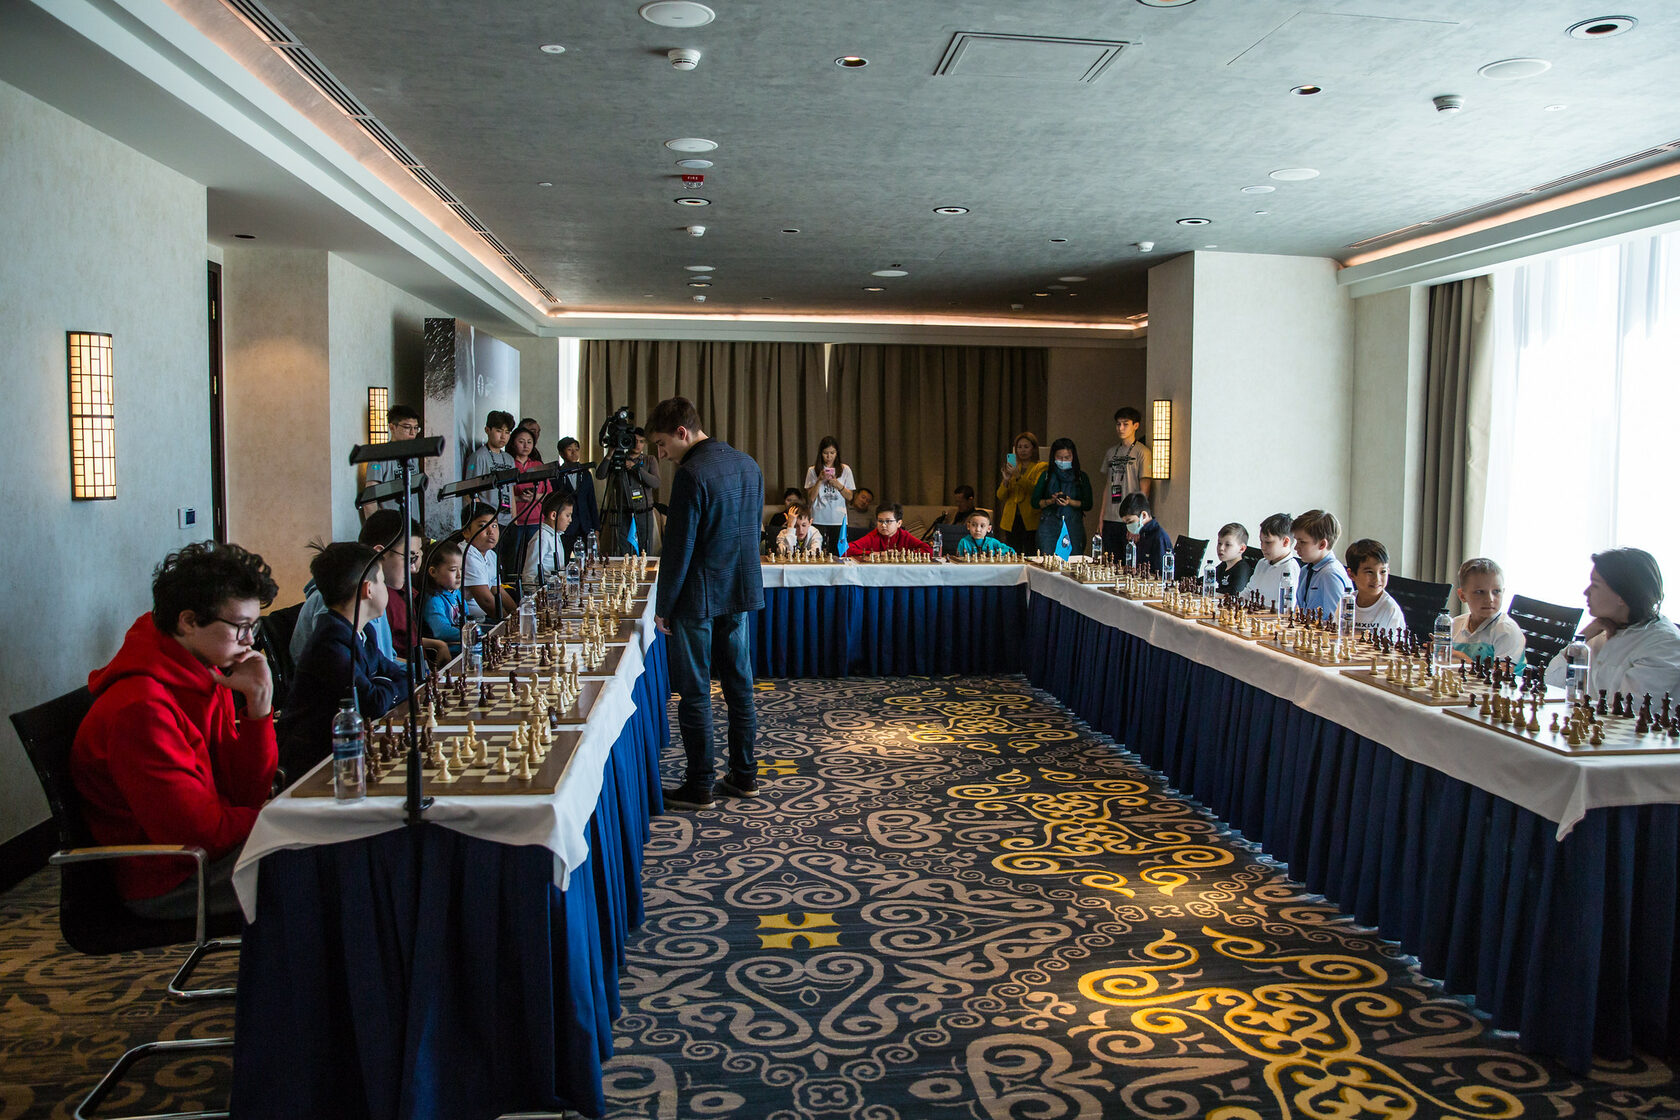 International Chess Federation on X: As usual, GM Daniil Dubov brings you  the recap of the most recent FIDE World Championship game. Game 7 was a  thriller! #NepoDing You can watch it